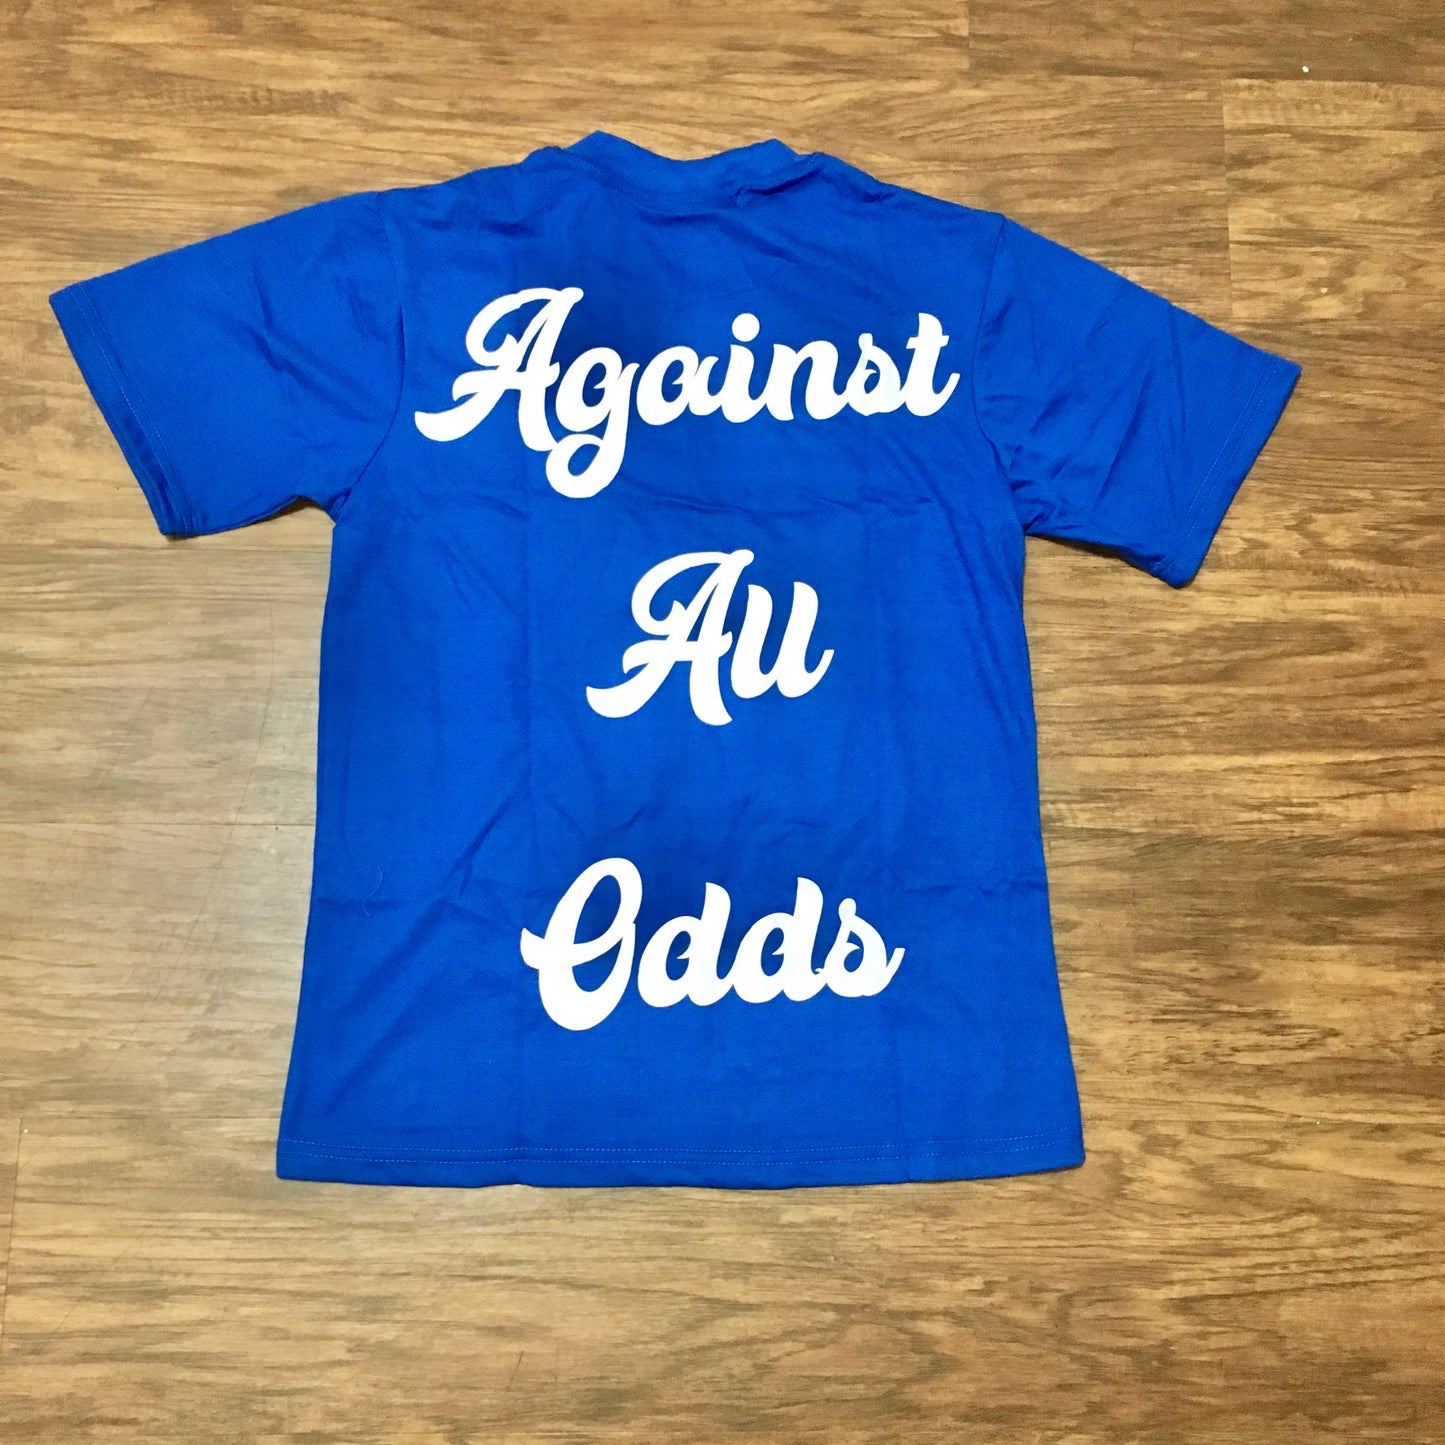 (Heavy Against All Odds T shirt)